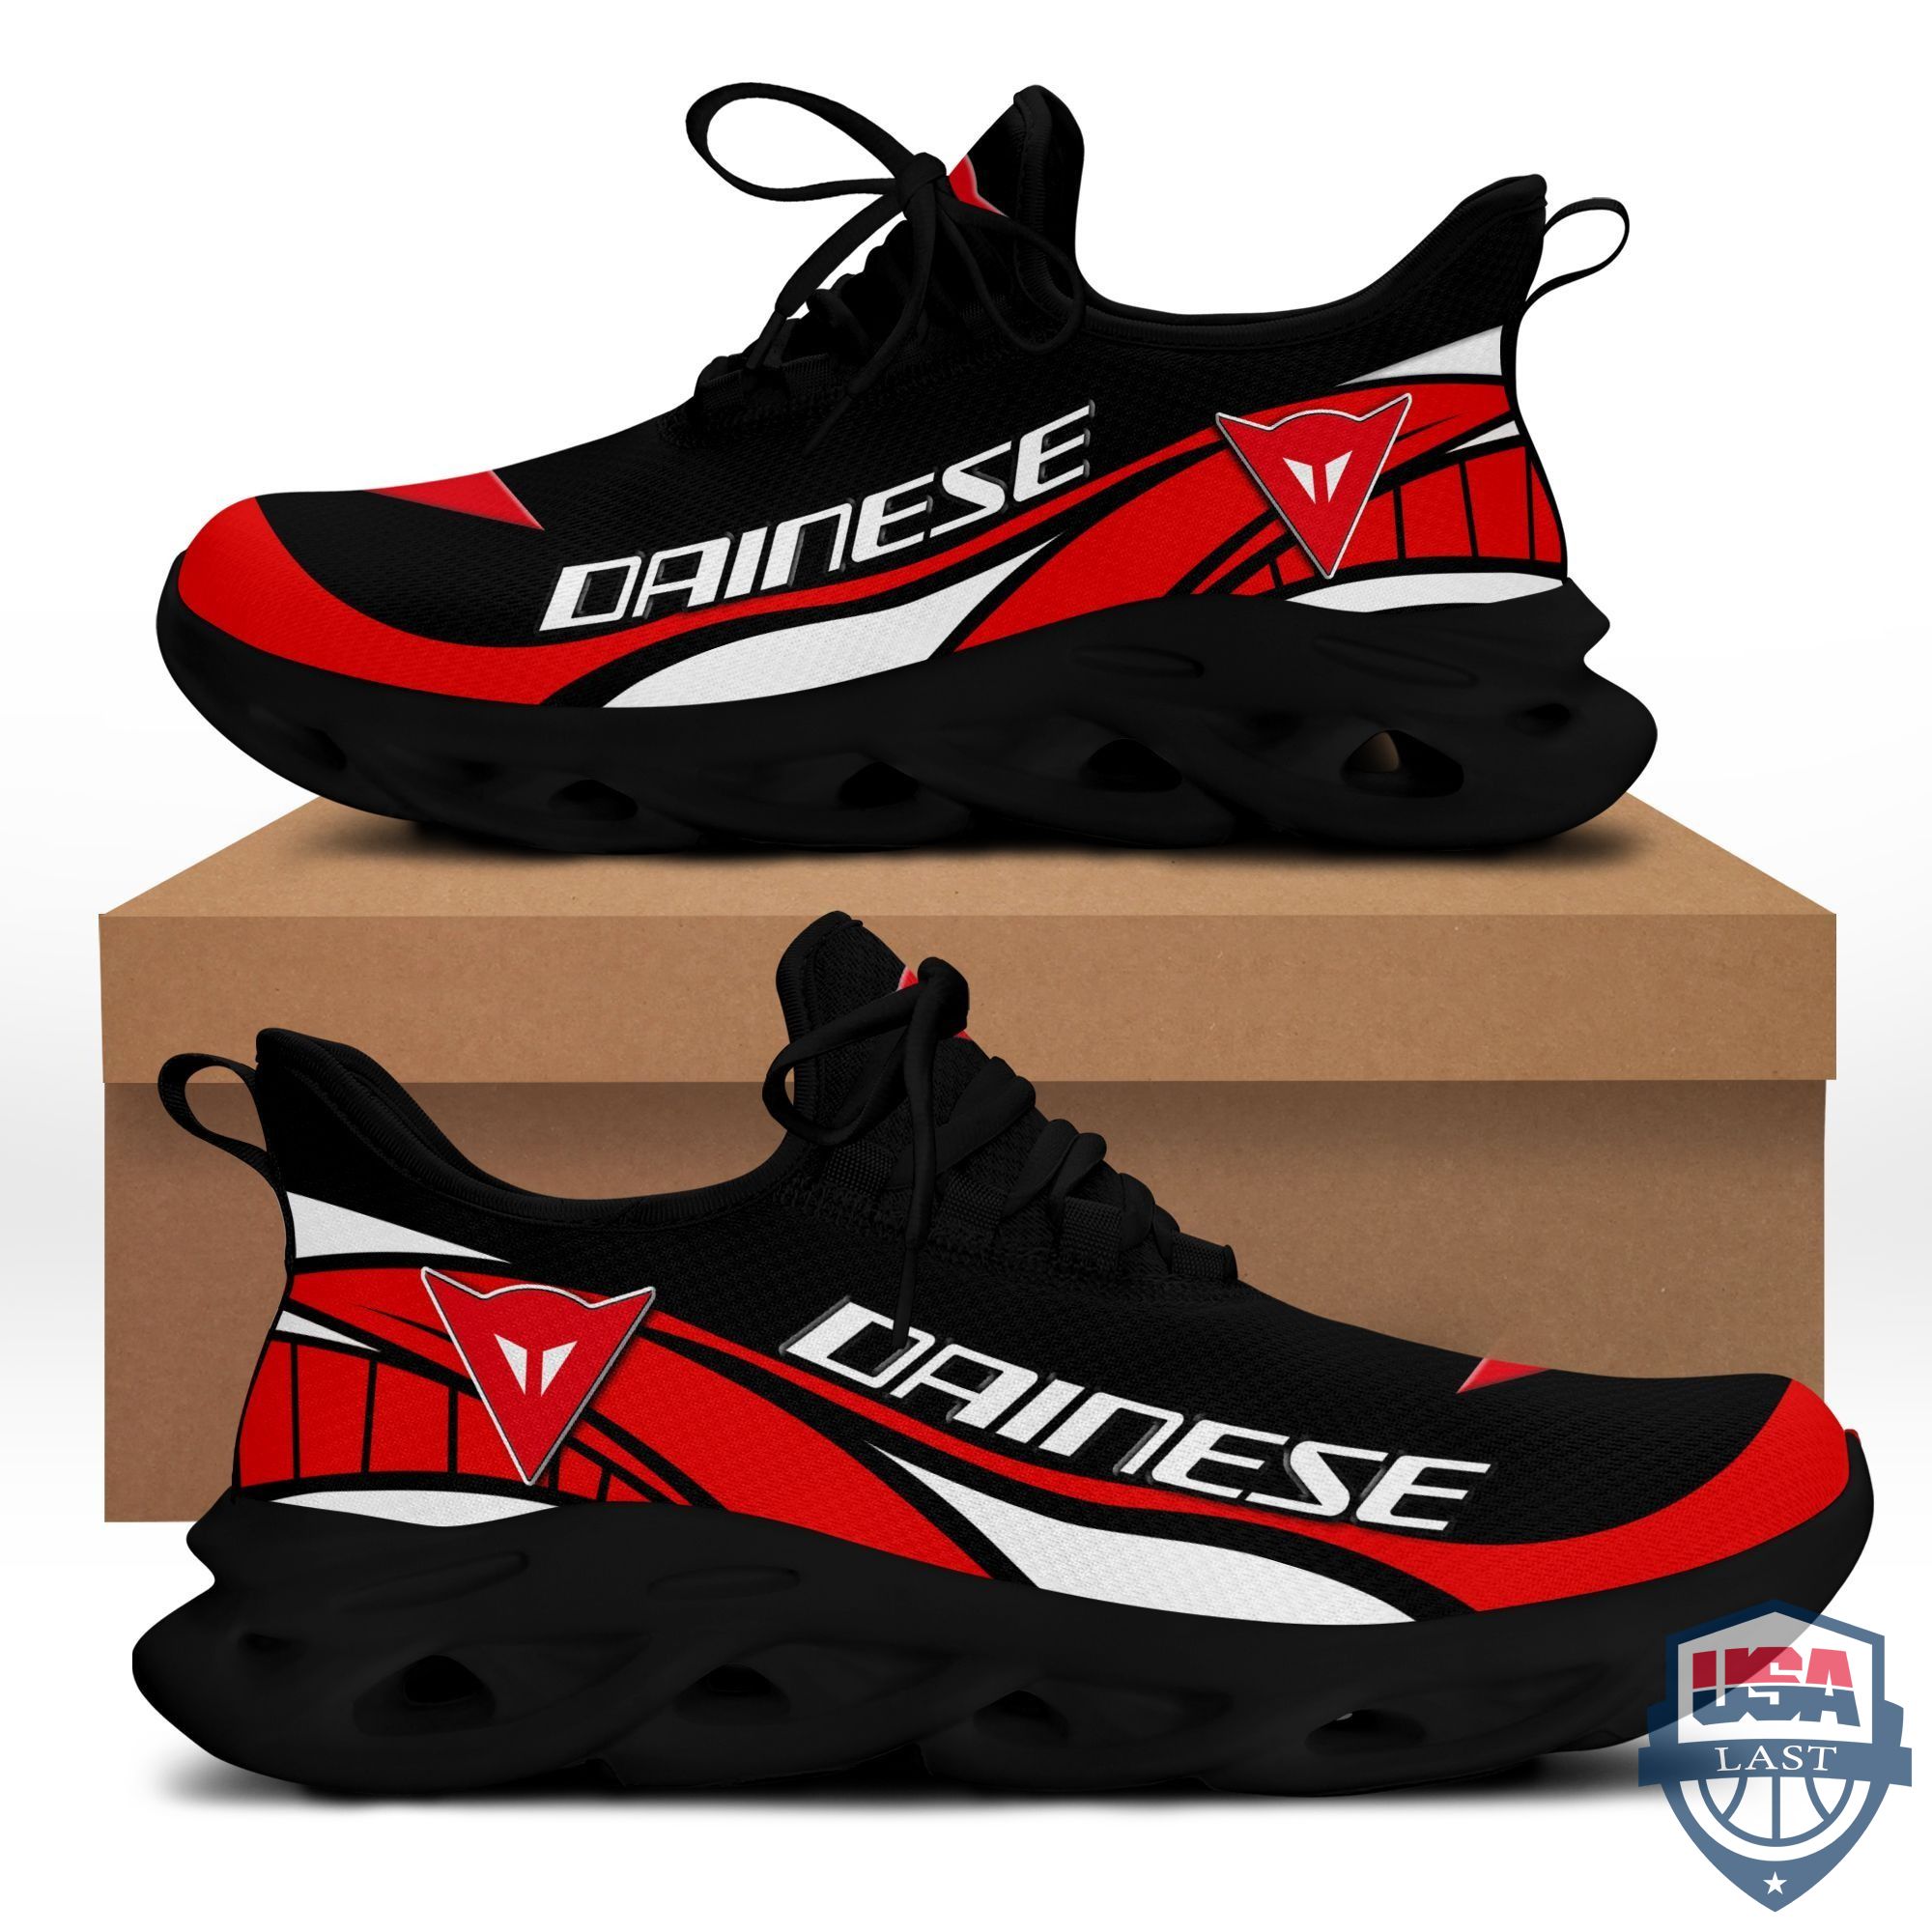 Dainese Clunky Max Soul Sneaker Red Version